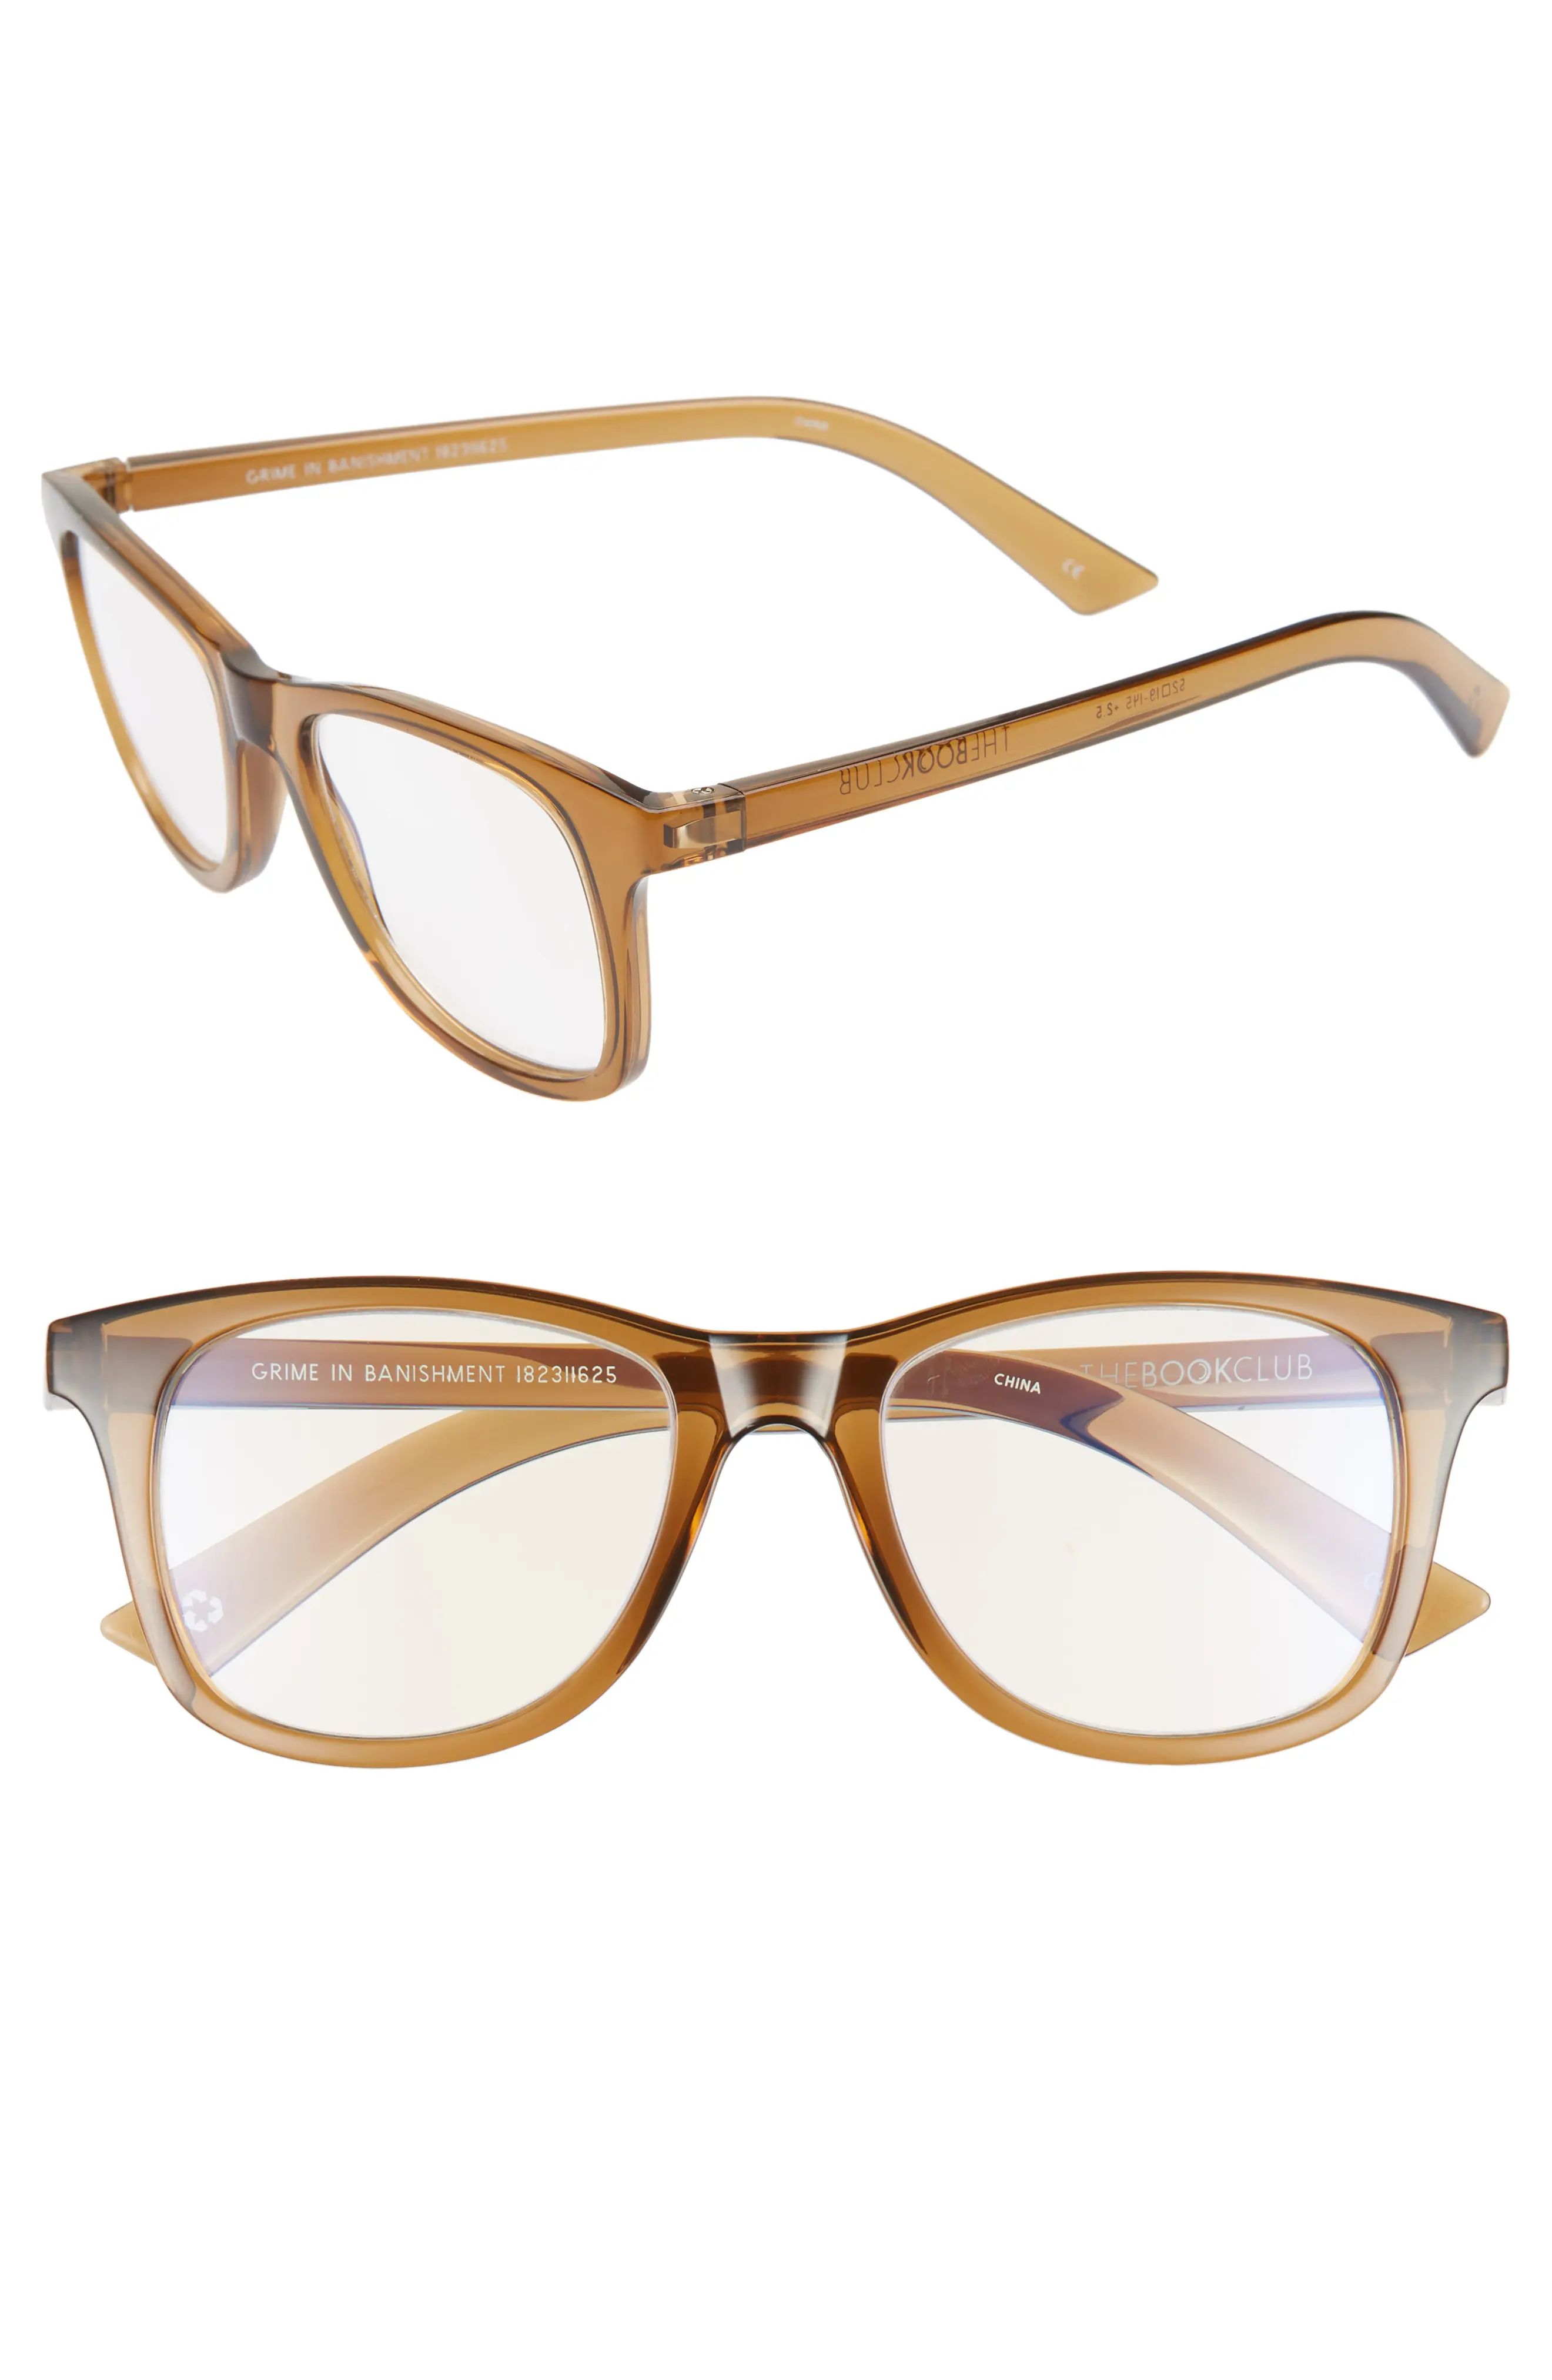 The Bookclub Grime in Banishment 52mm Reading Glasses | Nordstrom